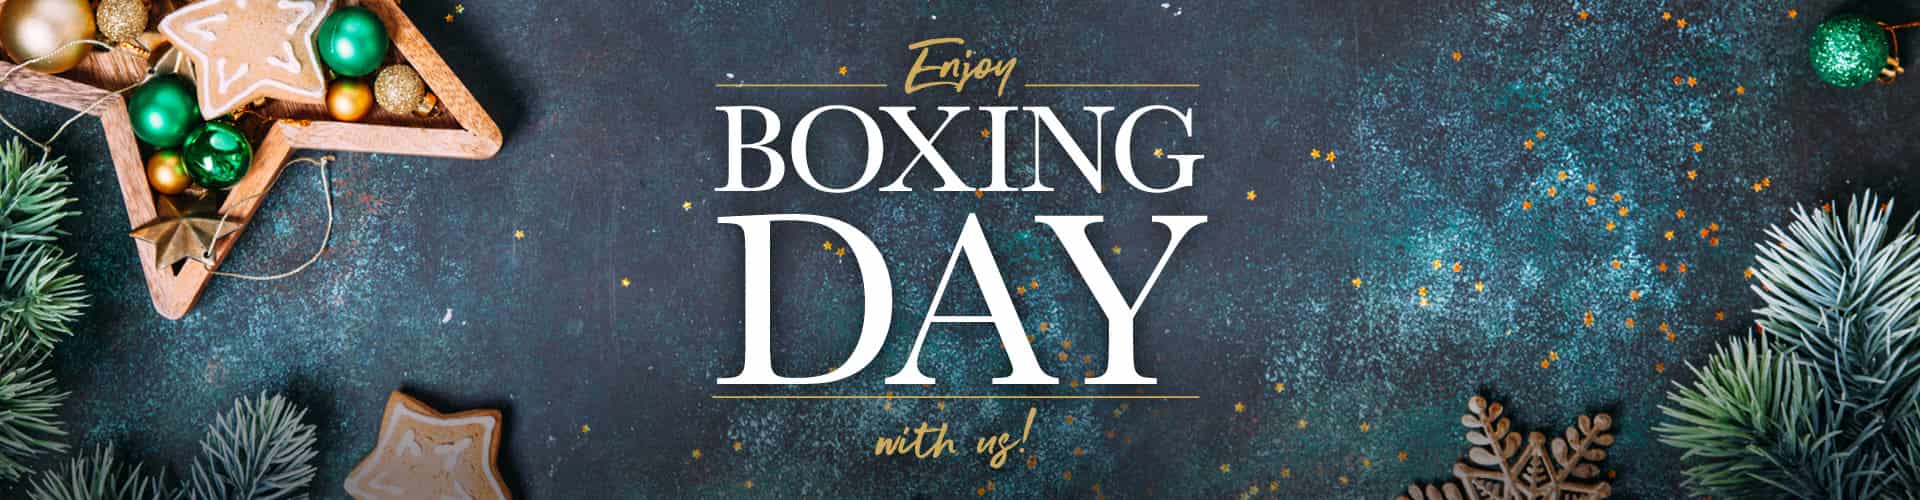 Enjoy Boxing Day with us at Old Halfway House